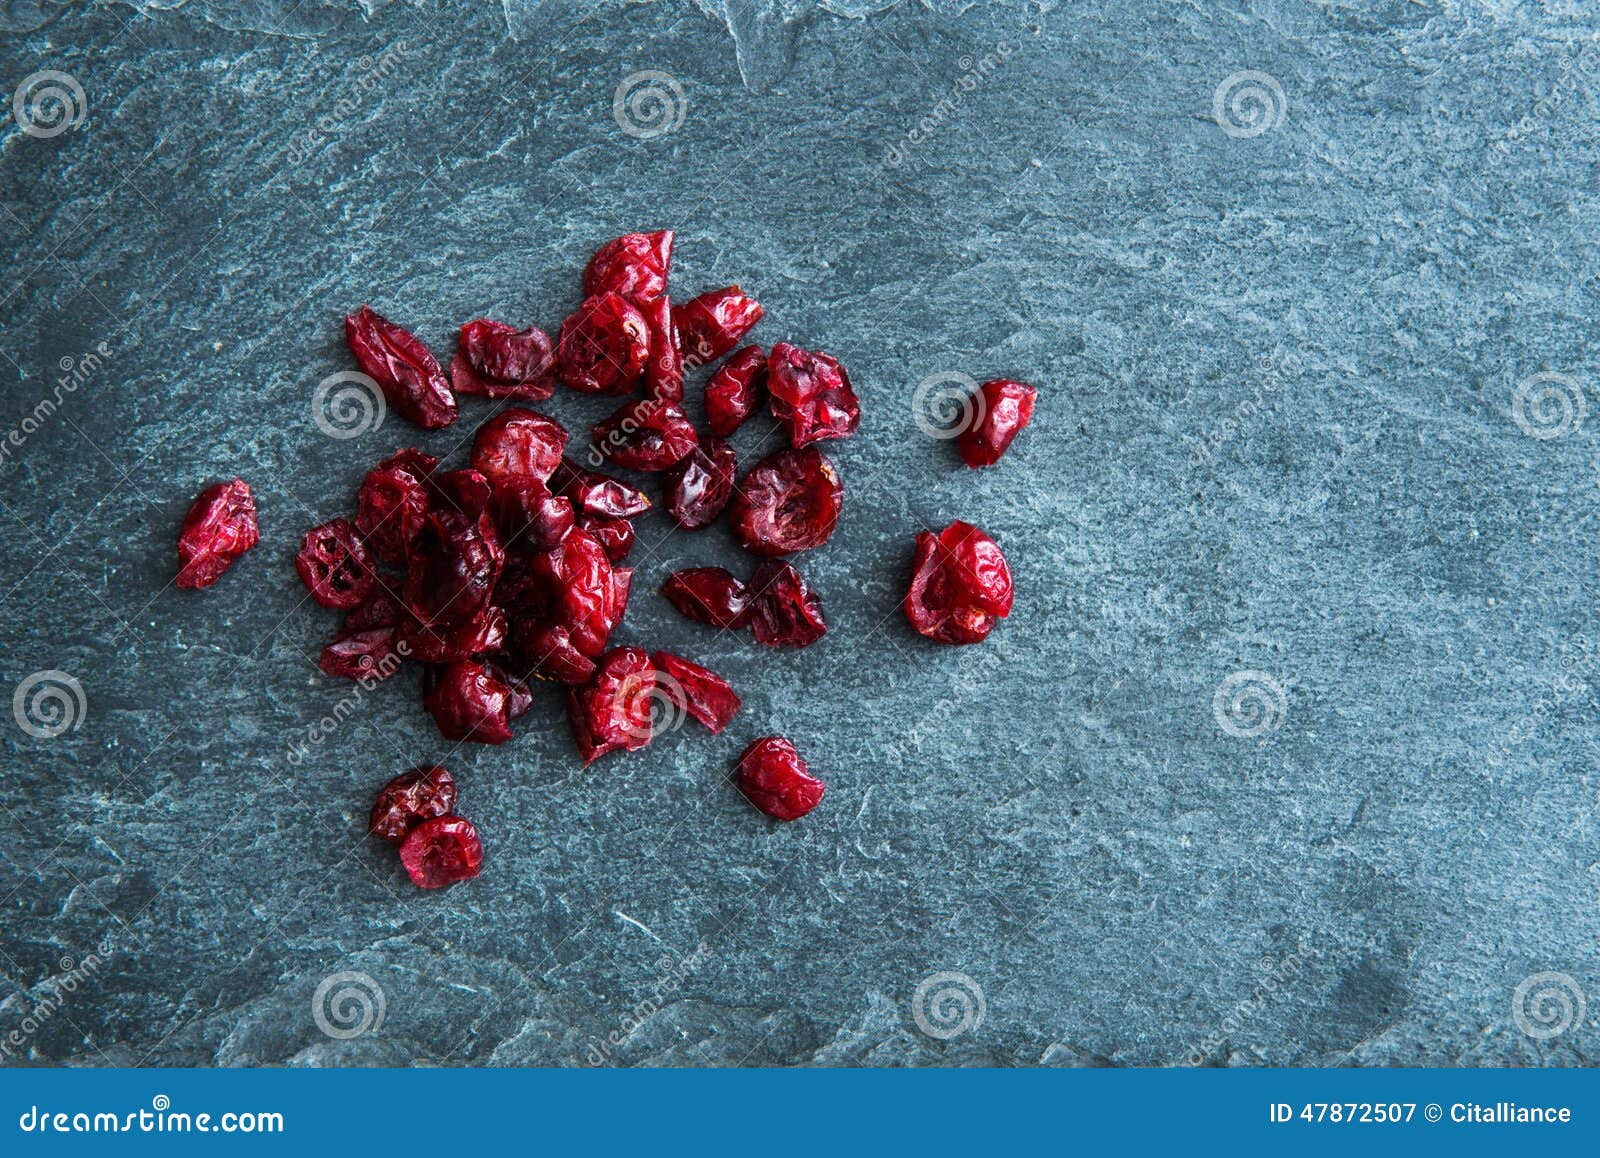 Closeup on Dried Lingonberries on Stone Substrate Stock Image - Image